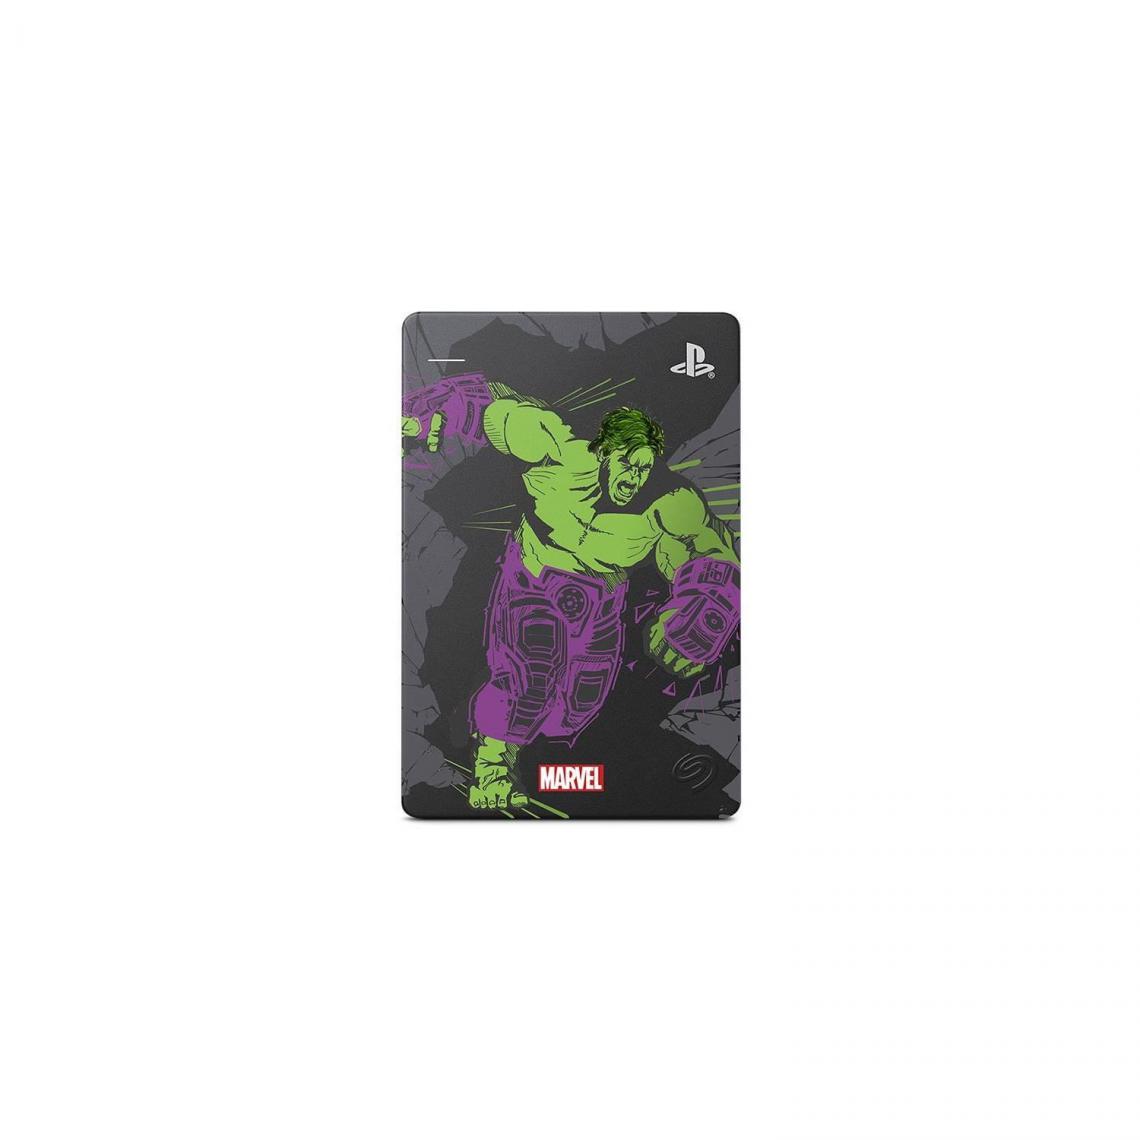 Seagate - SEAGATE - Disque Dur Externe Gaming PS4 - Marvel Avengers Hulk - 2To - USB 3.0 (STGD2000204) - Disque Dur interne